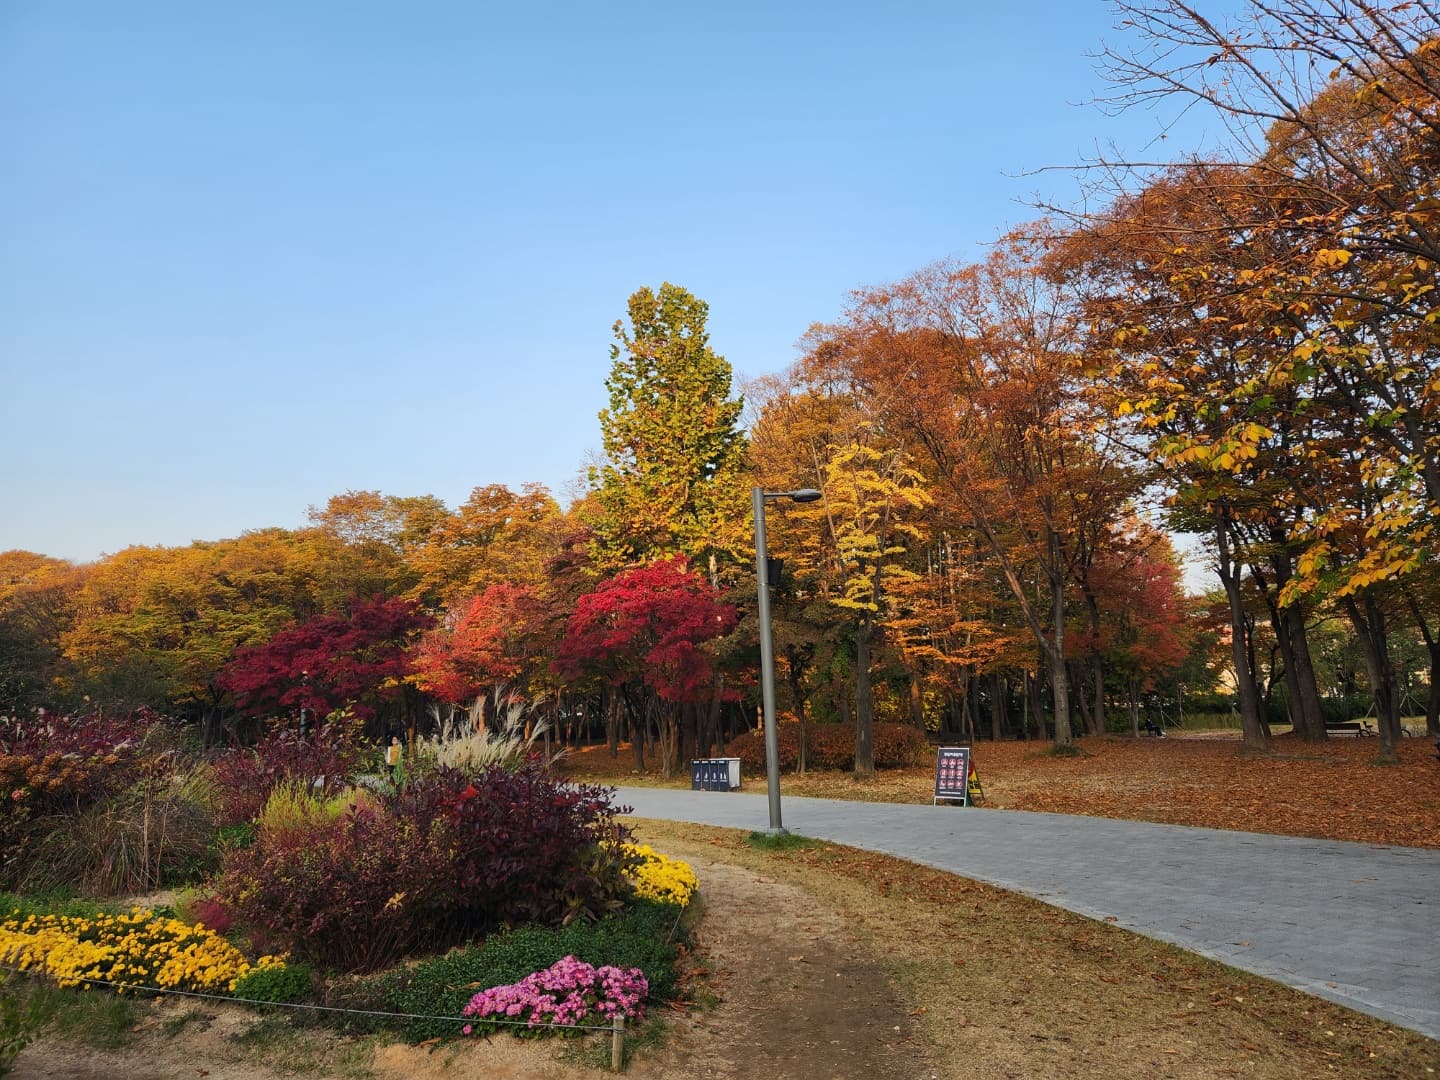 Maeheon Citizen's Forest (Yangjae Citizens' Forest)3 : The scenery of the forest with trees colored with autumn leaves